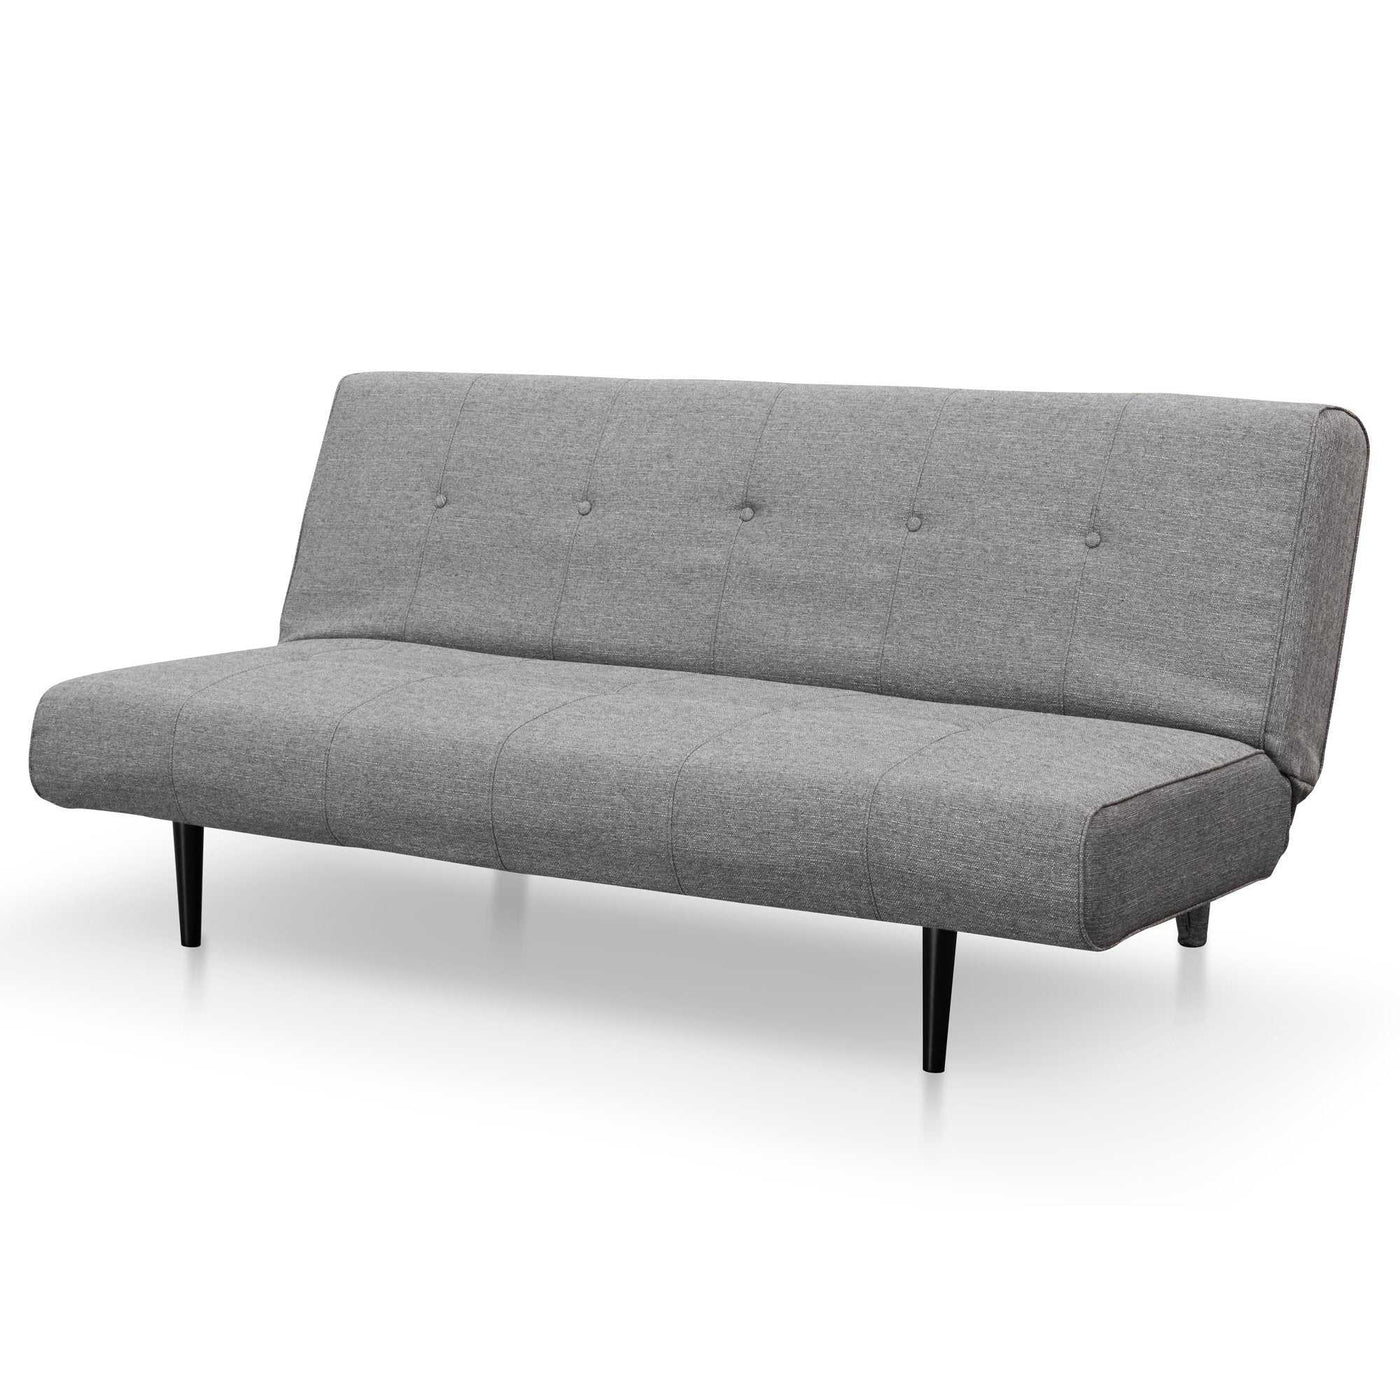 2 Seater Sofa Bed - Cloudy Grey